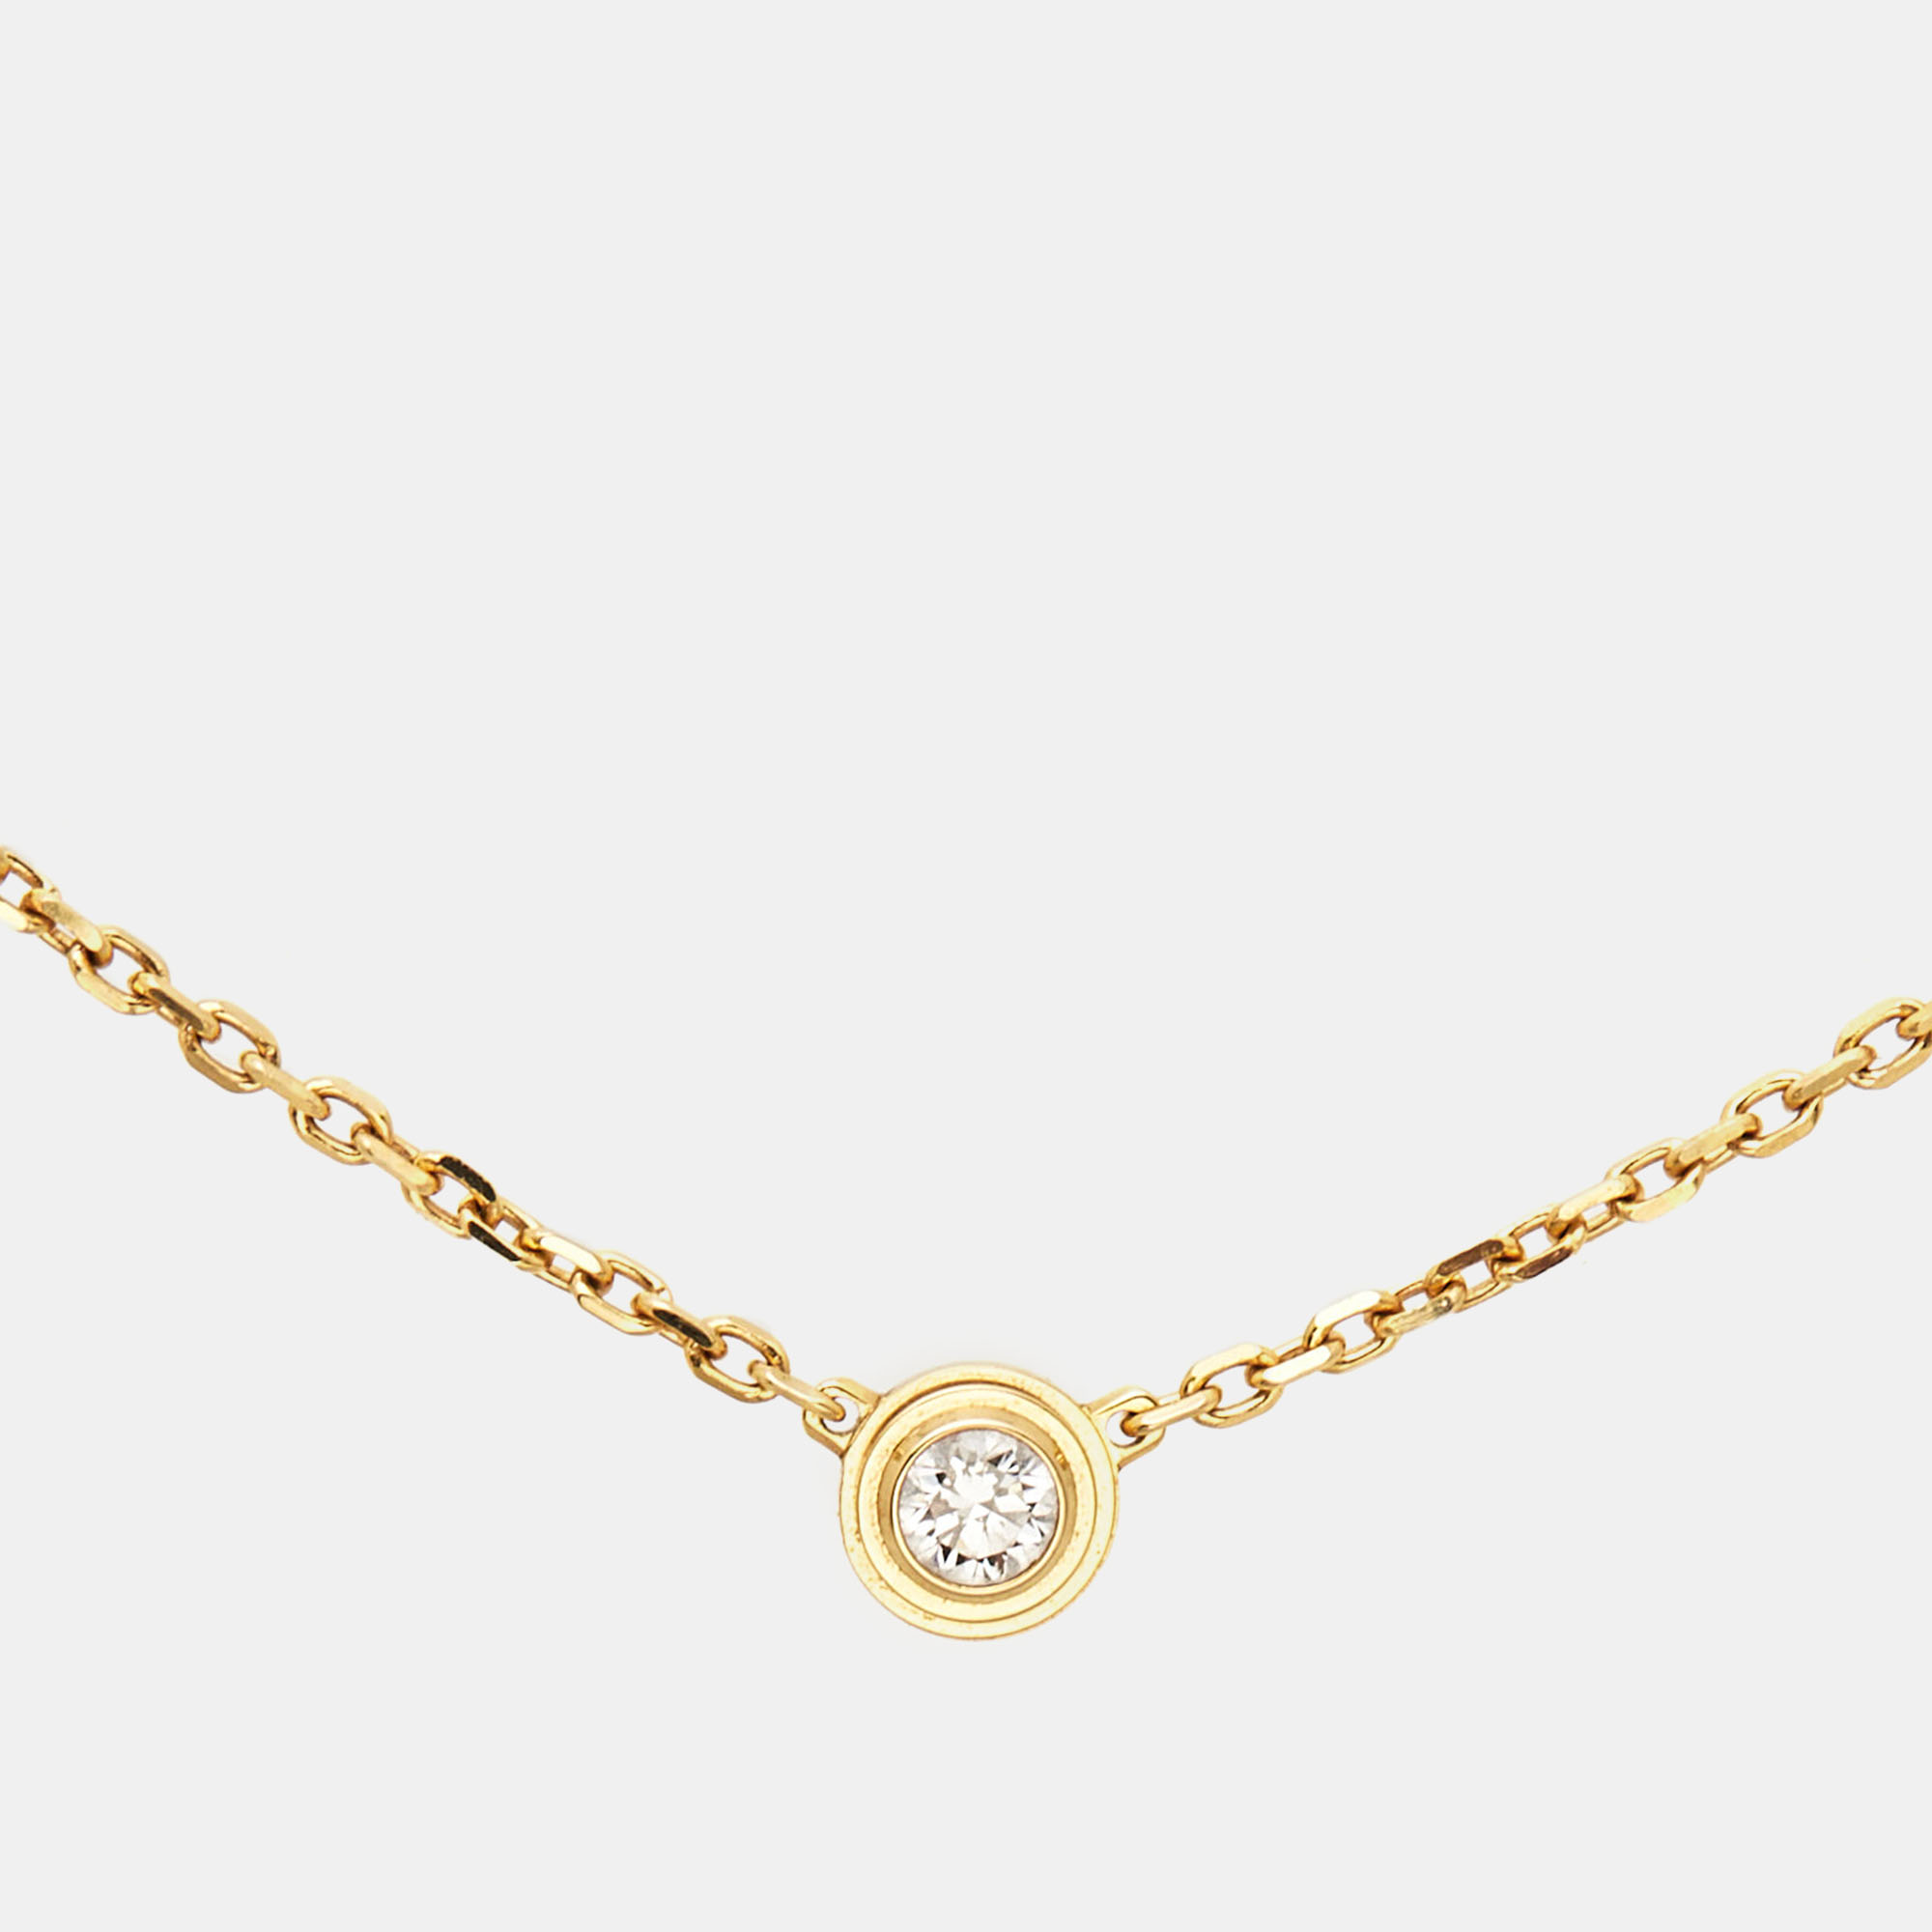 The Timeless Elegance of Cartier D'Amour Necklace | by Farhin Bargain Queen  | Medium